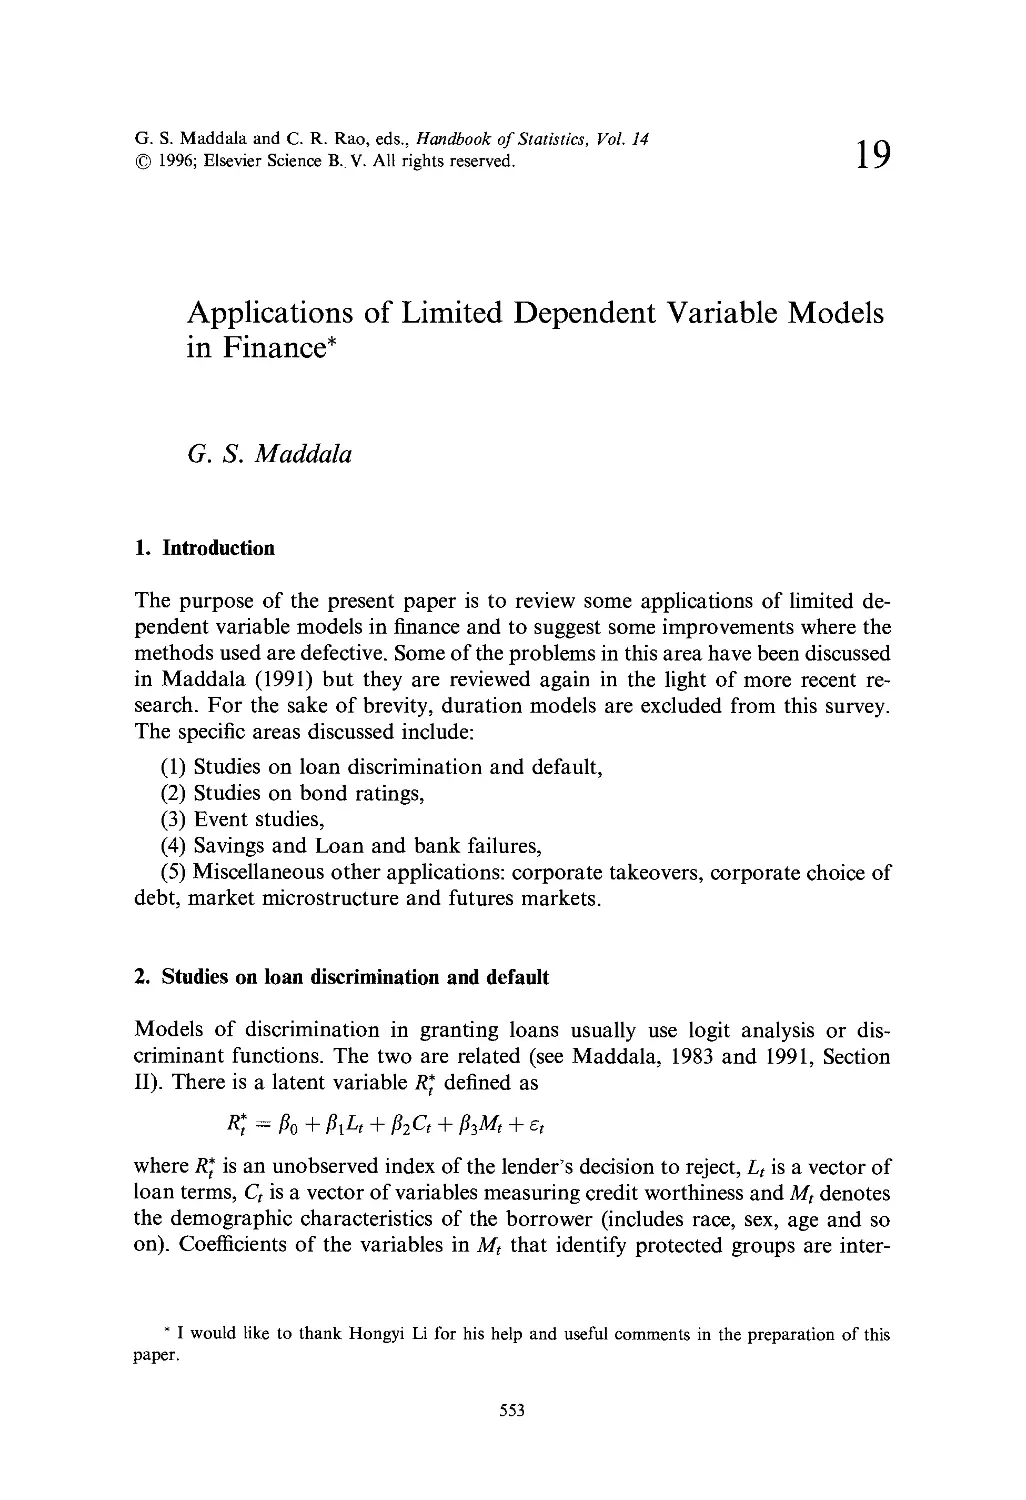 19. Applications of Limited Dependent Variable Models in Finance